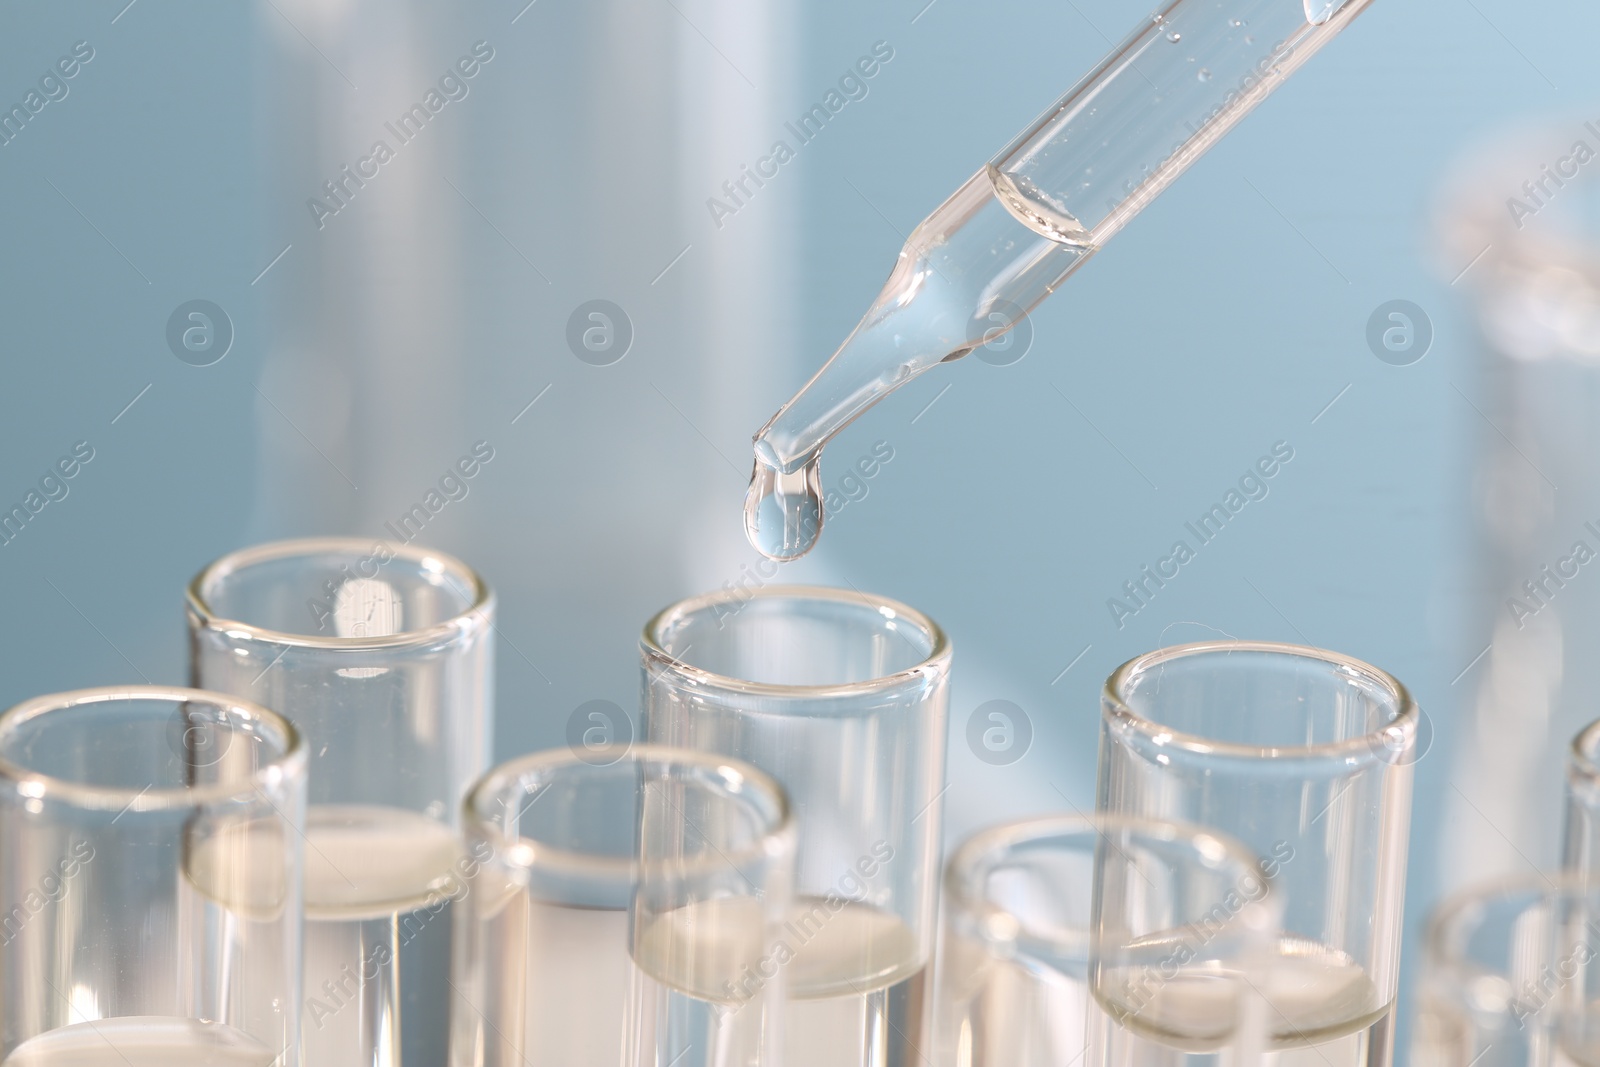 Photo of Laboratory analysis. Dripping liquid from pipette into glass test tube on blurred background, closeup